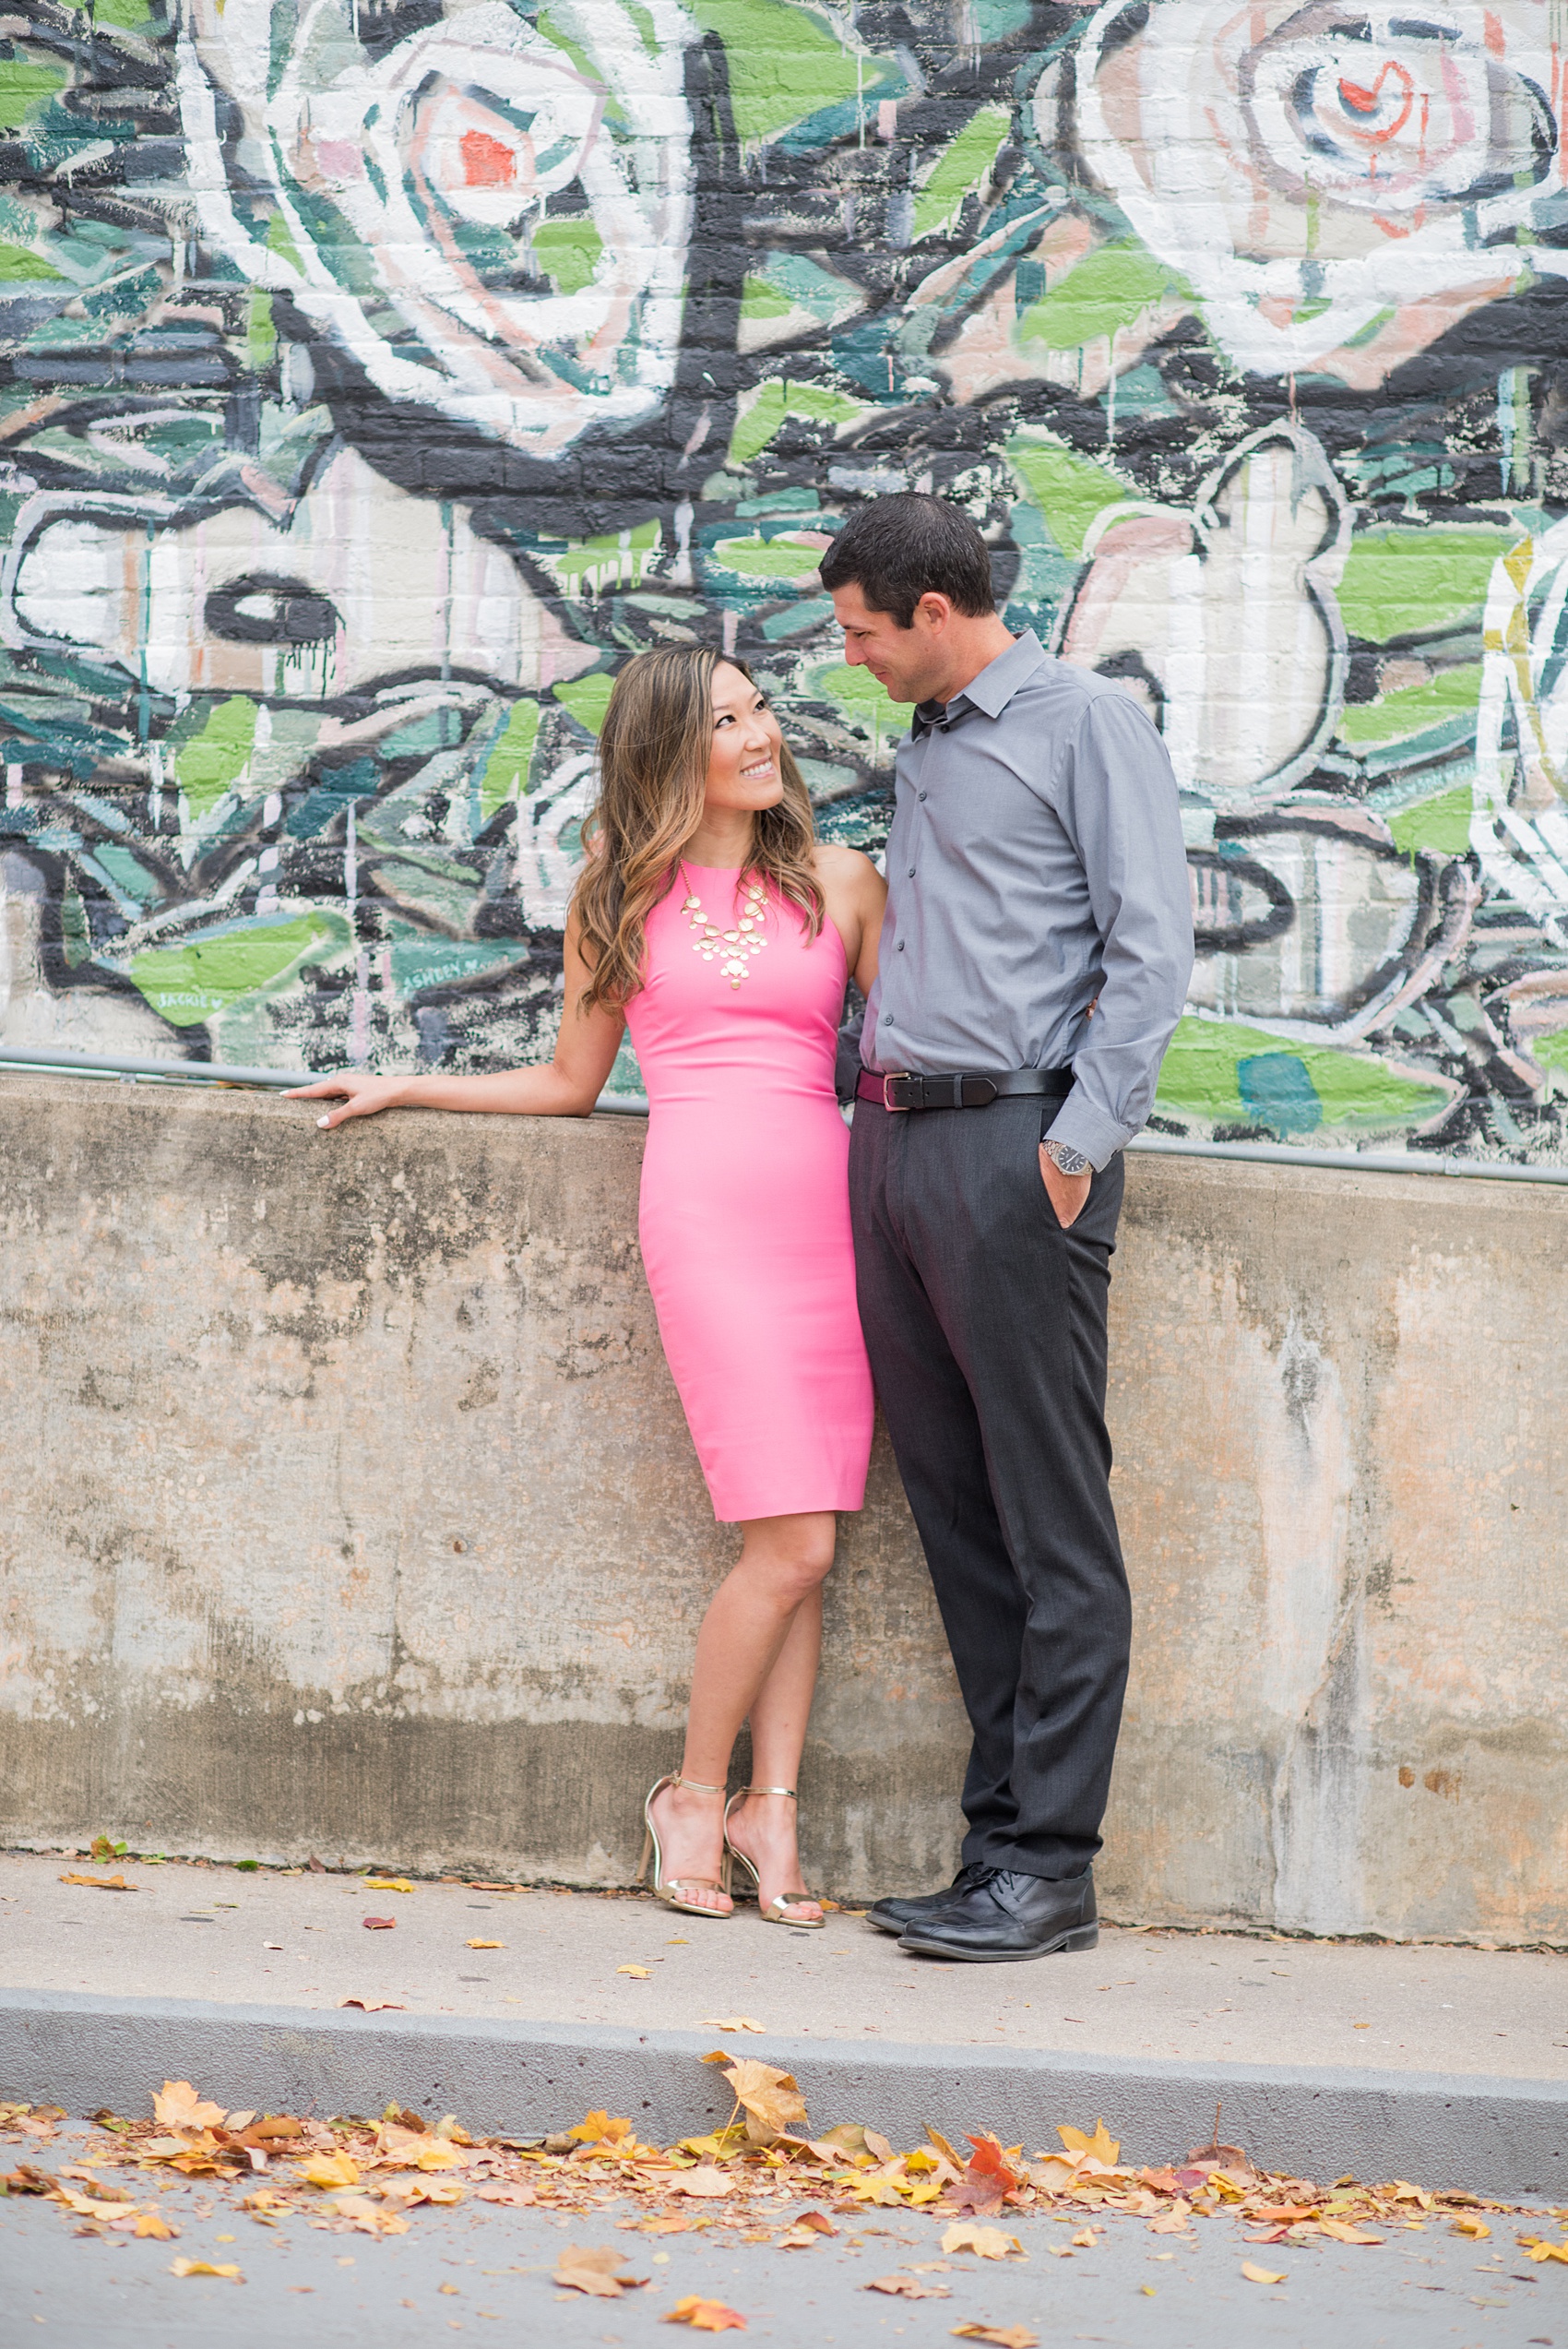 Colorful photos taken during a fall, autumn season engagement session. Images taken by Mikkel Paige Photography in an urban city setting. Click through to see more from this vibrant, unique photography session with lots of murals, street art and fun colors!